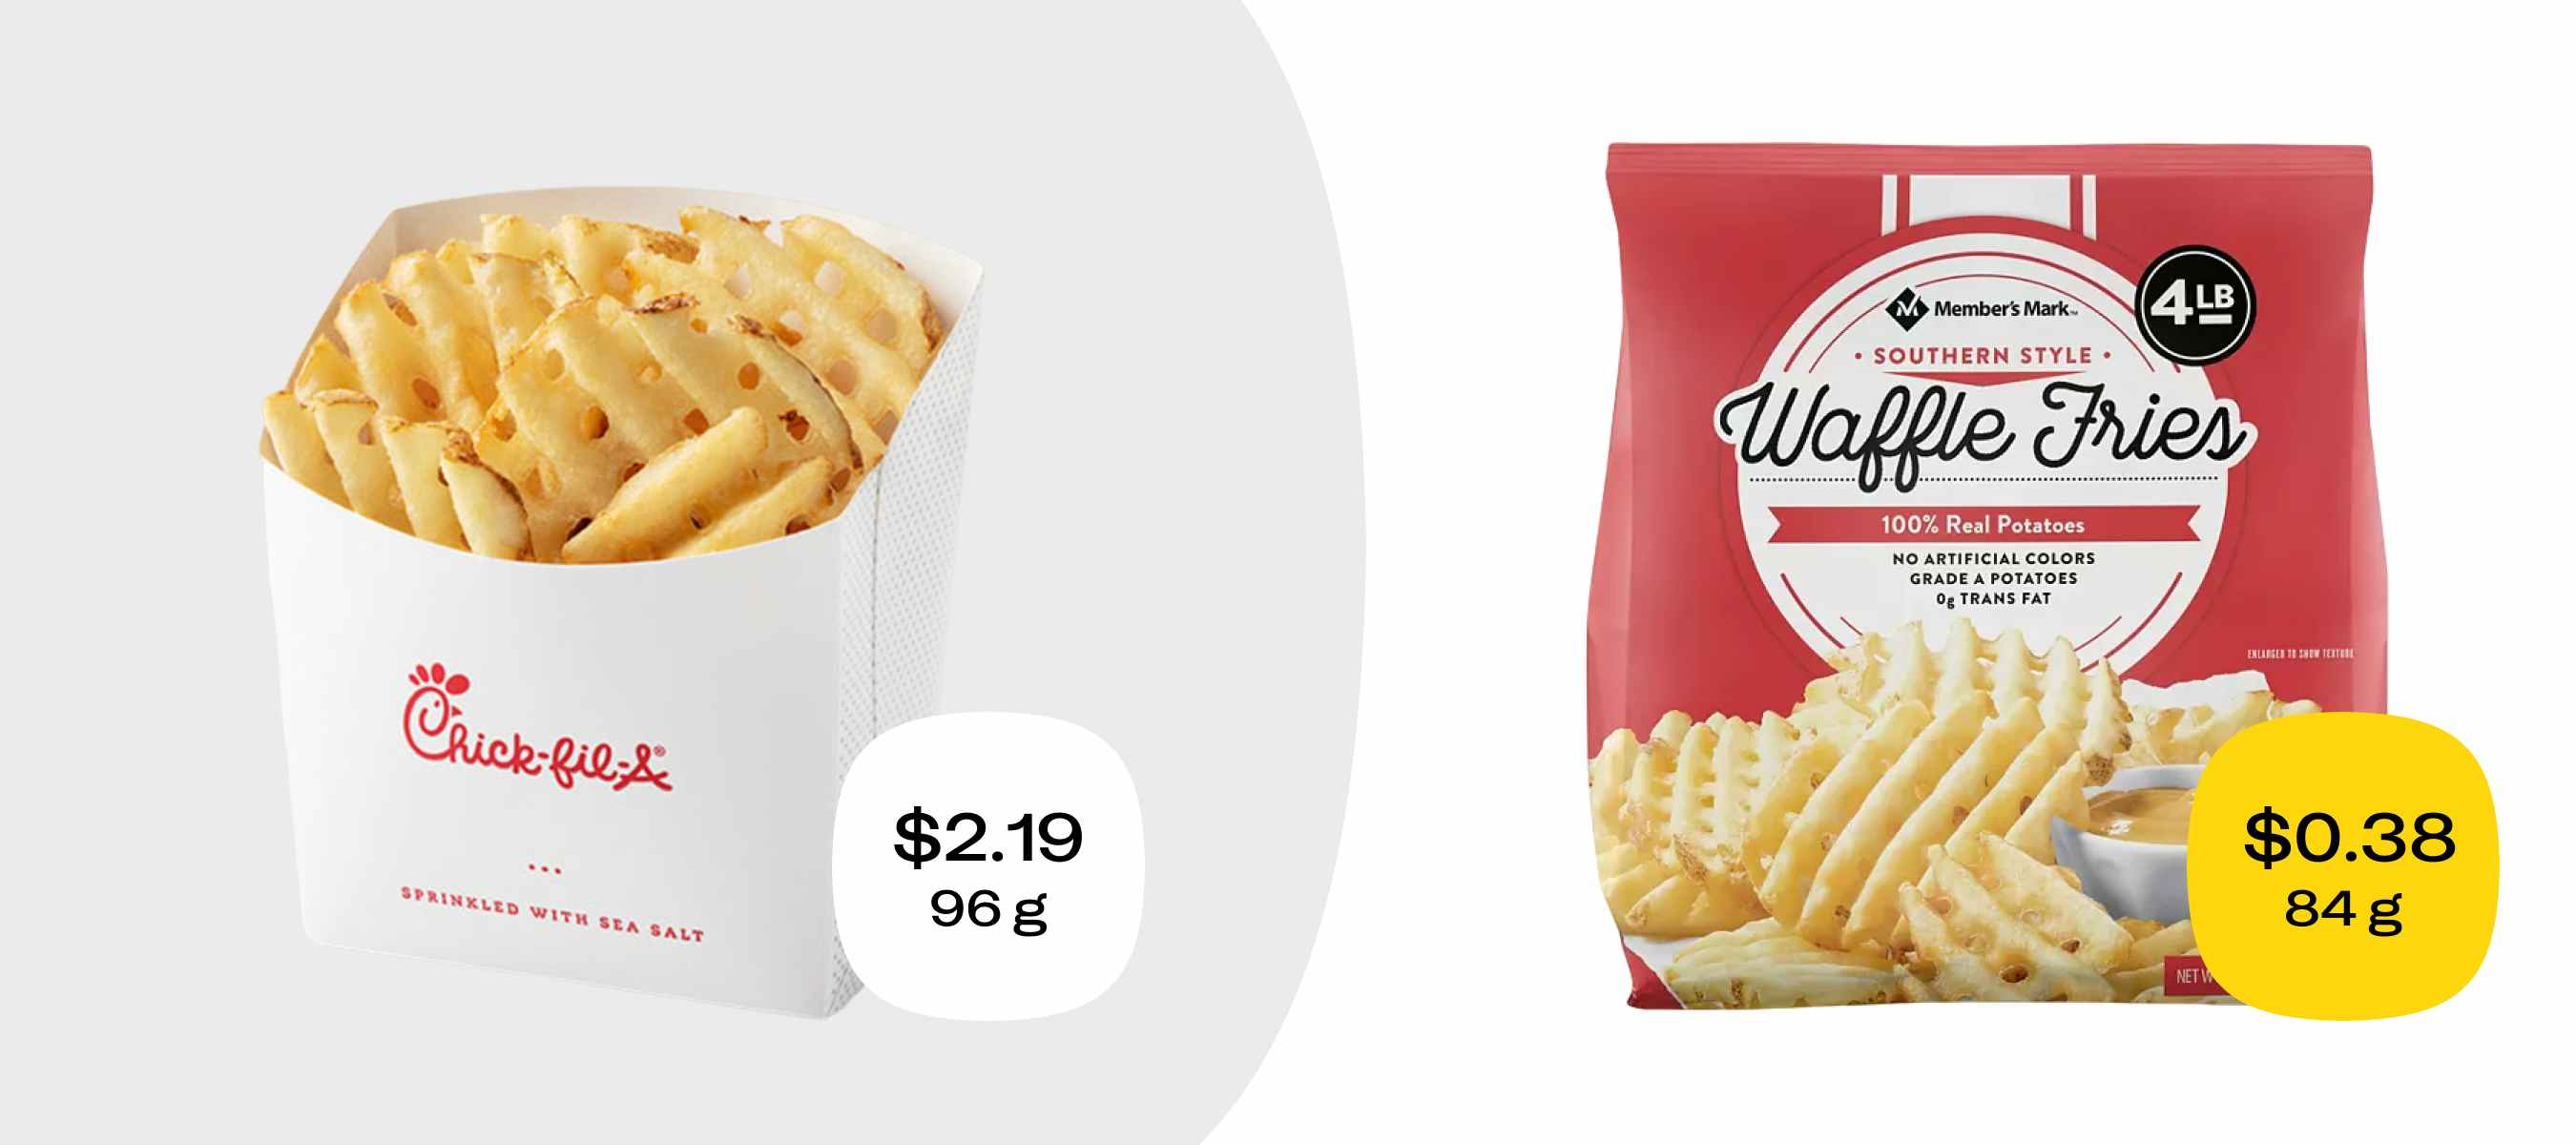 chick fil a fries for $2.19 versus a similar amount from sams club for $0.38